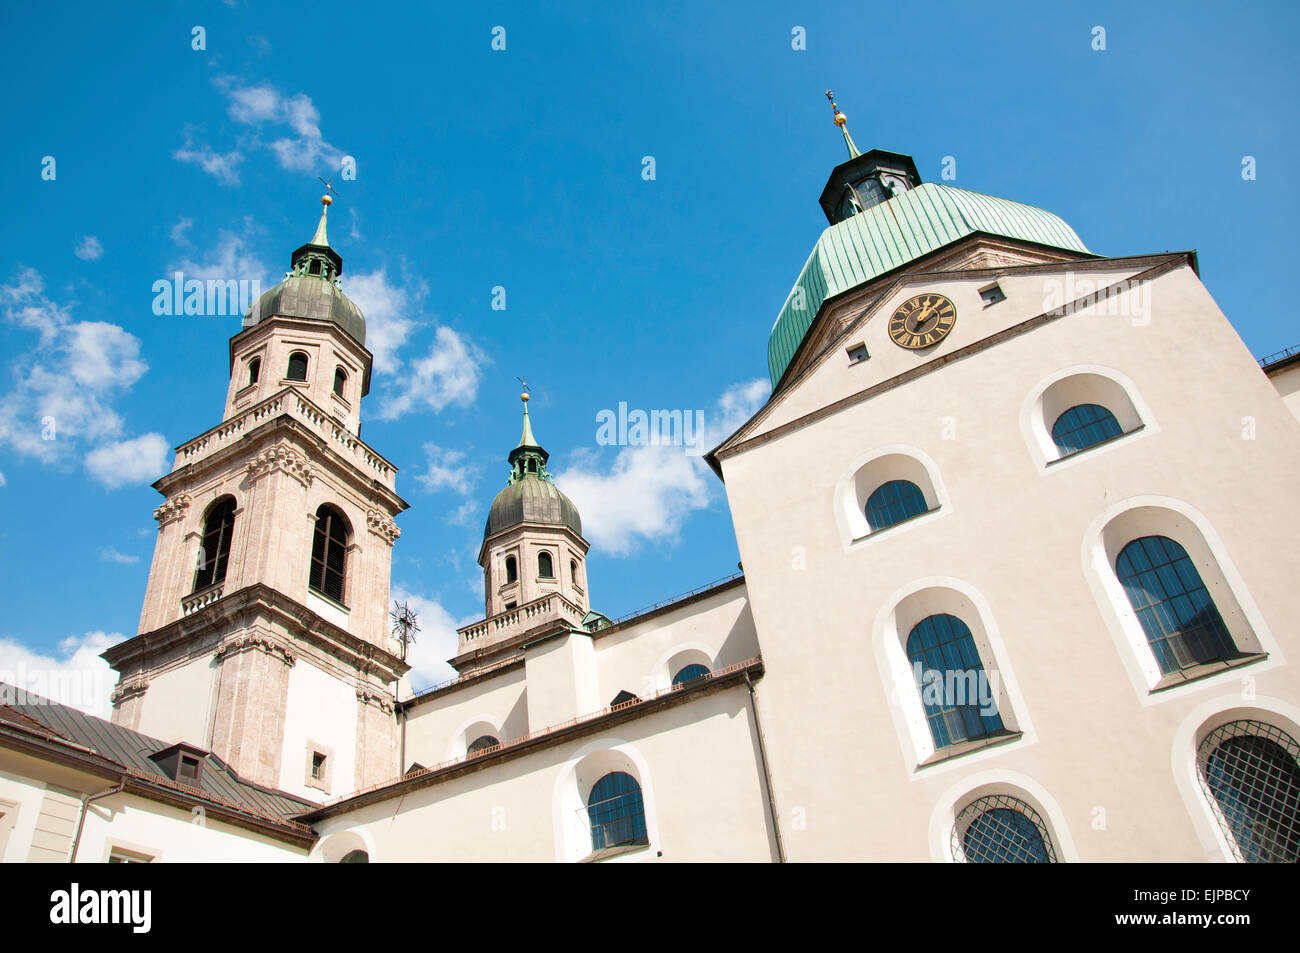 A building in Innsbruck, Austria on a beautiful clear day with a blue sky. Stock Photo